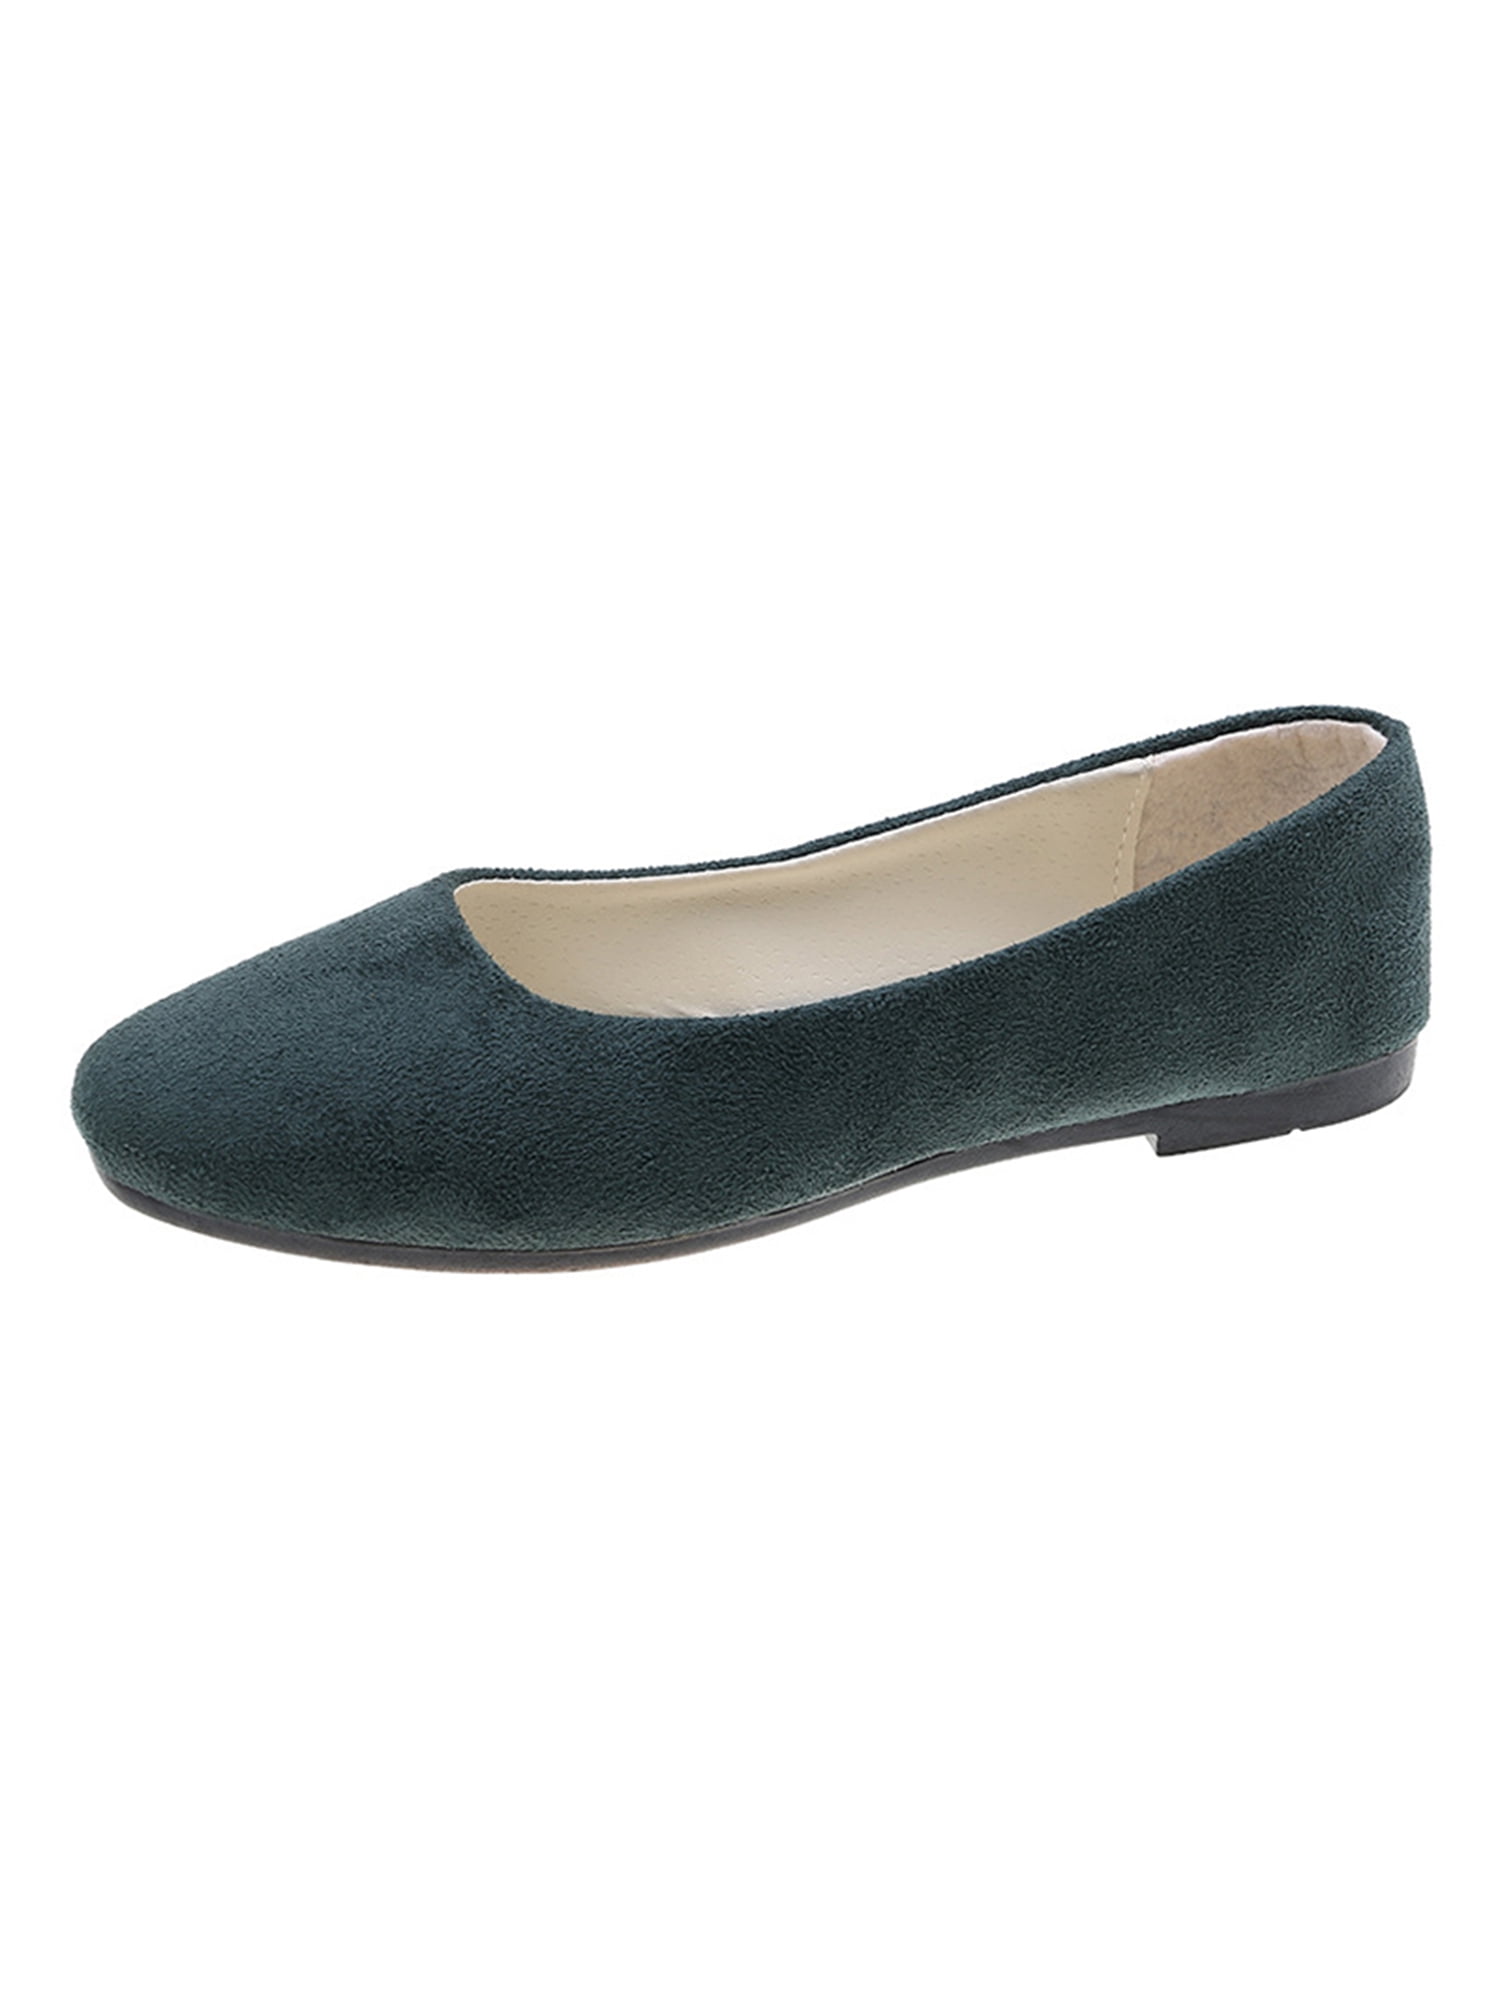 H&M Dark Green Suede Flat Shoes, Women's Fashion, Footwear, Flats & Sandals  on Carousell